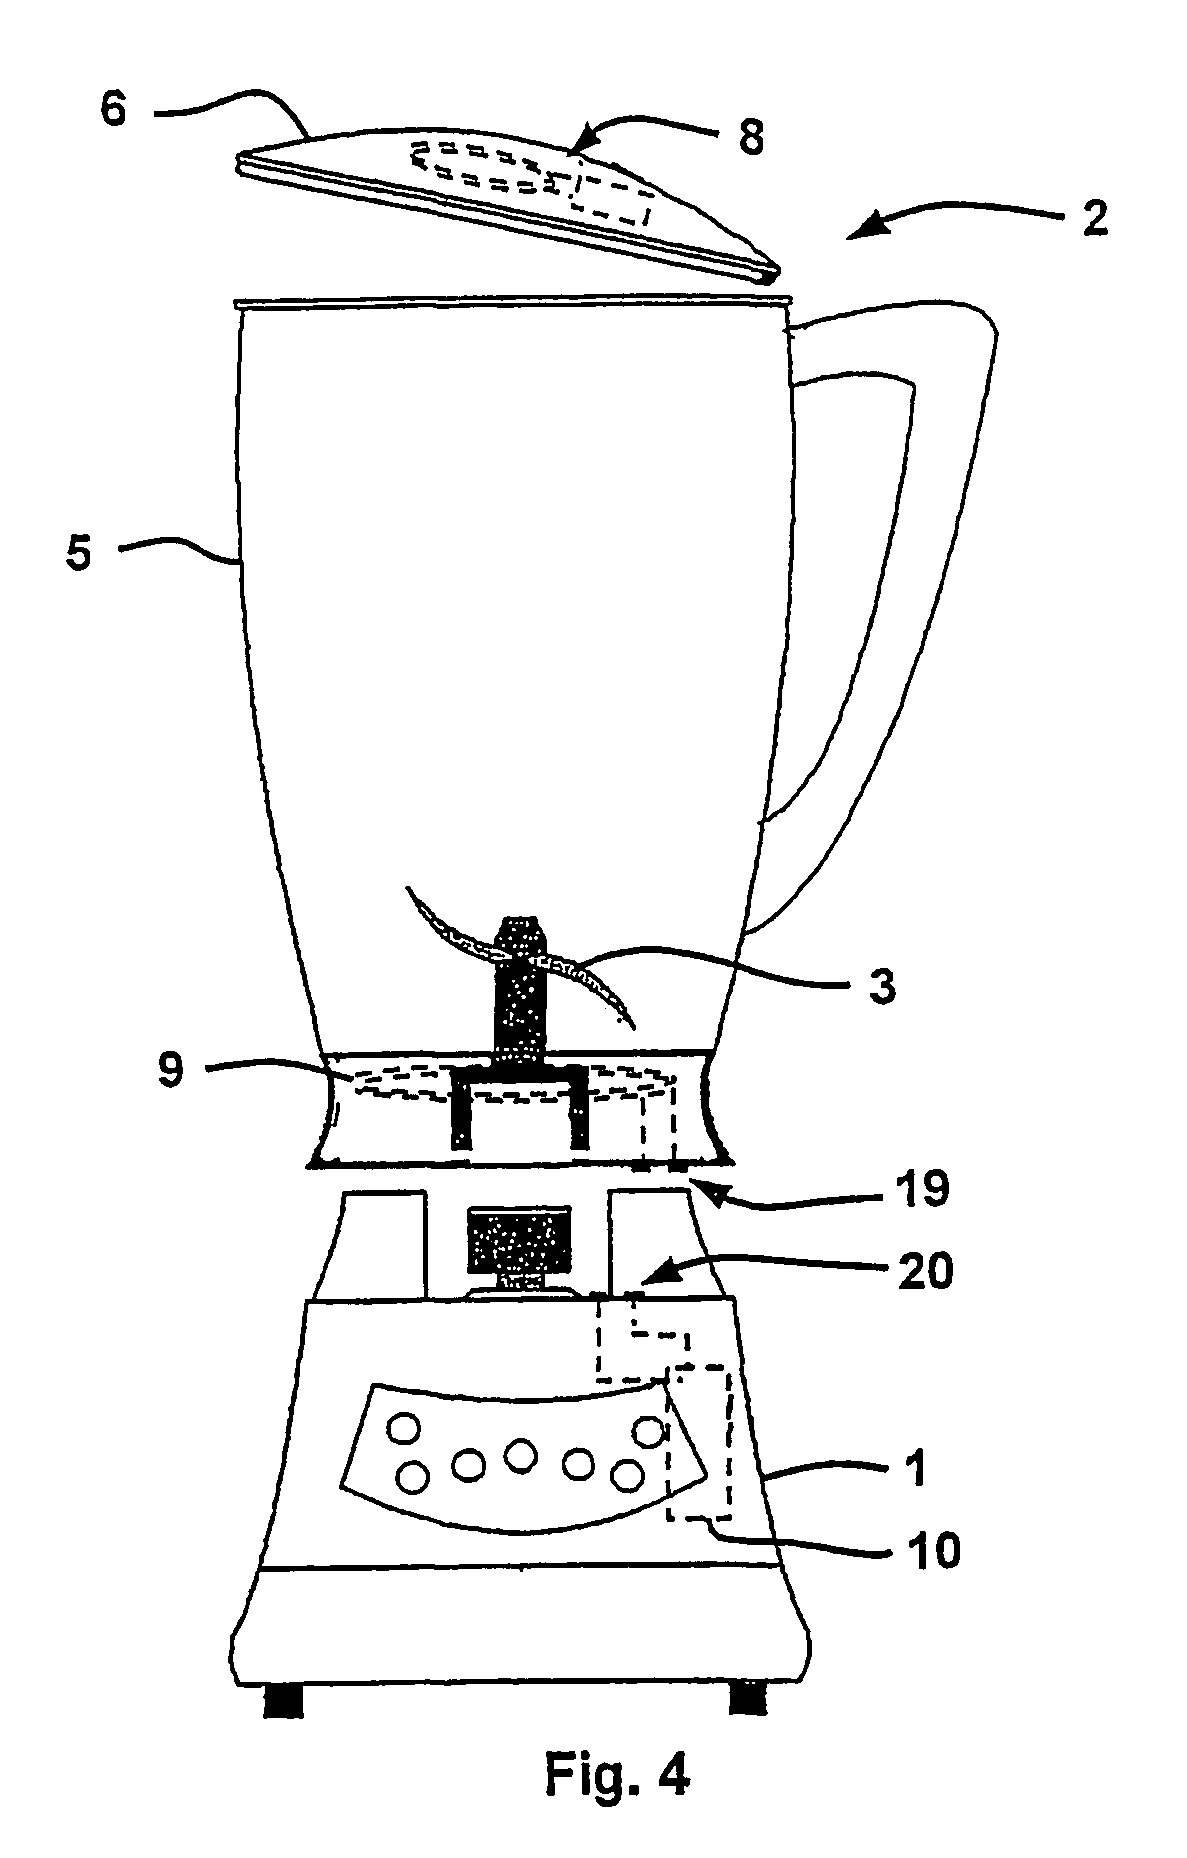 Safety device for electric household appliances